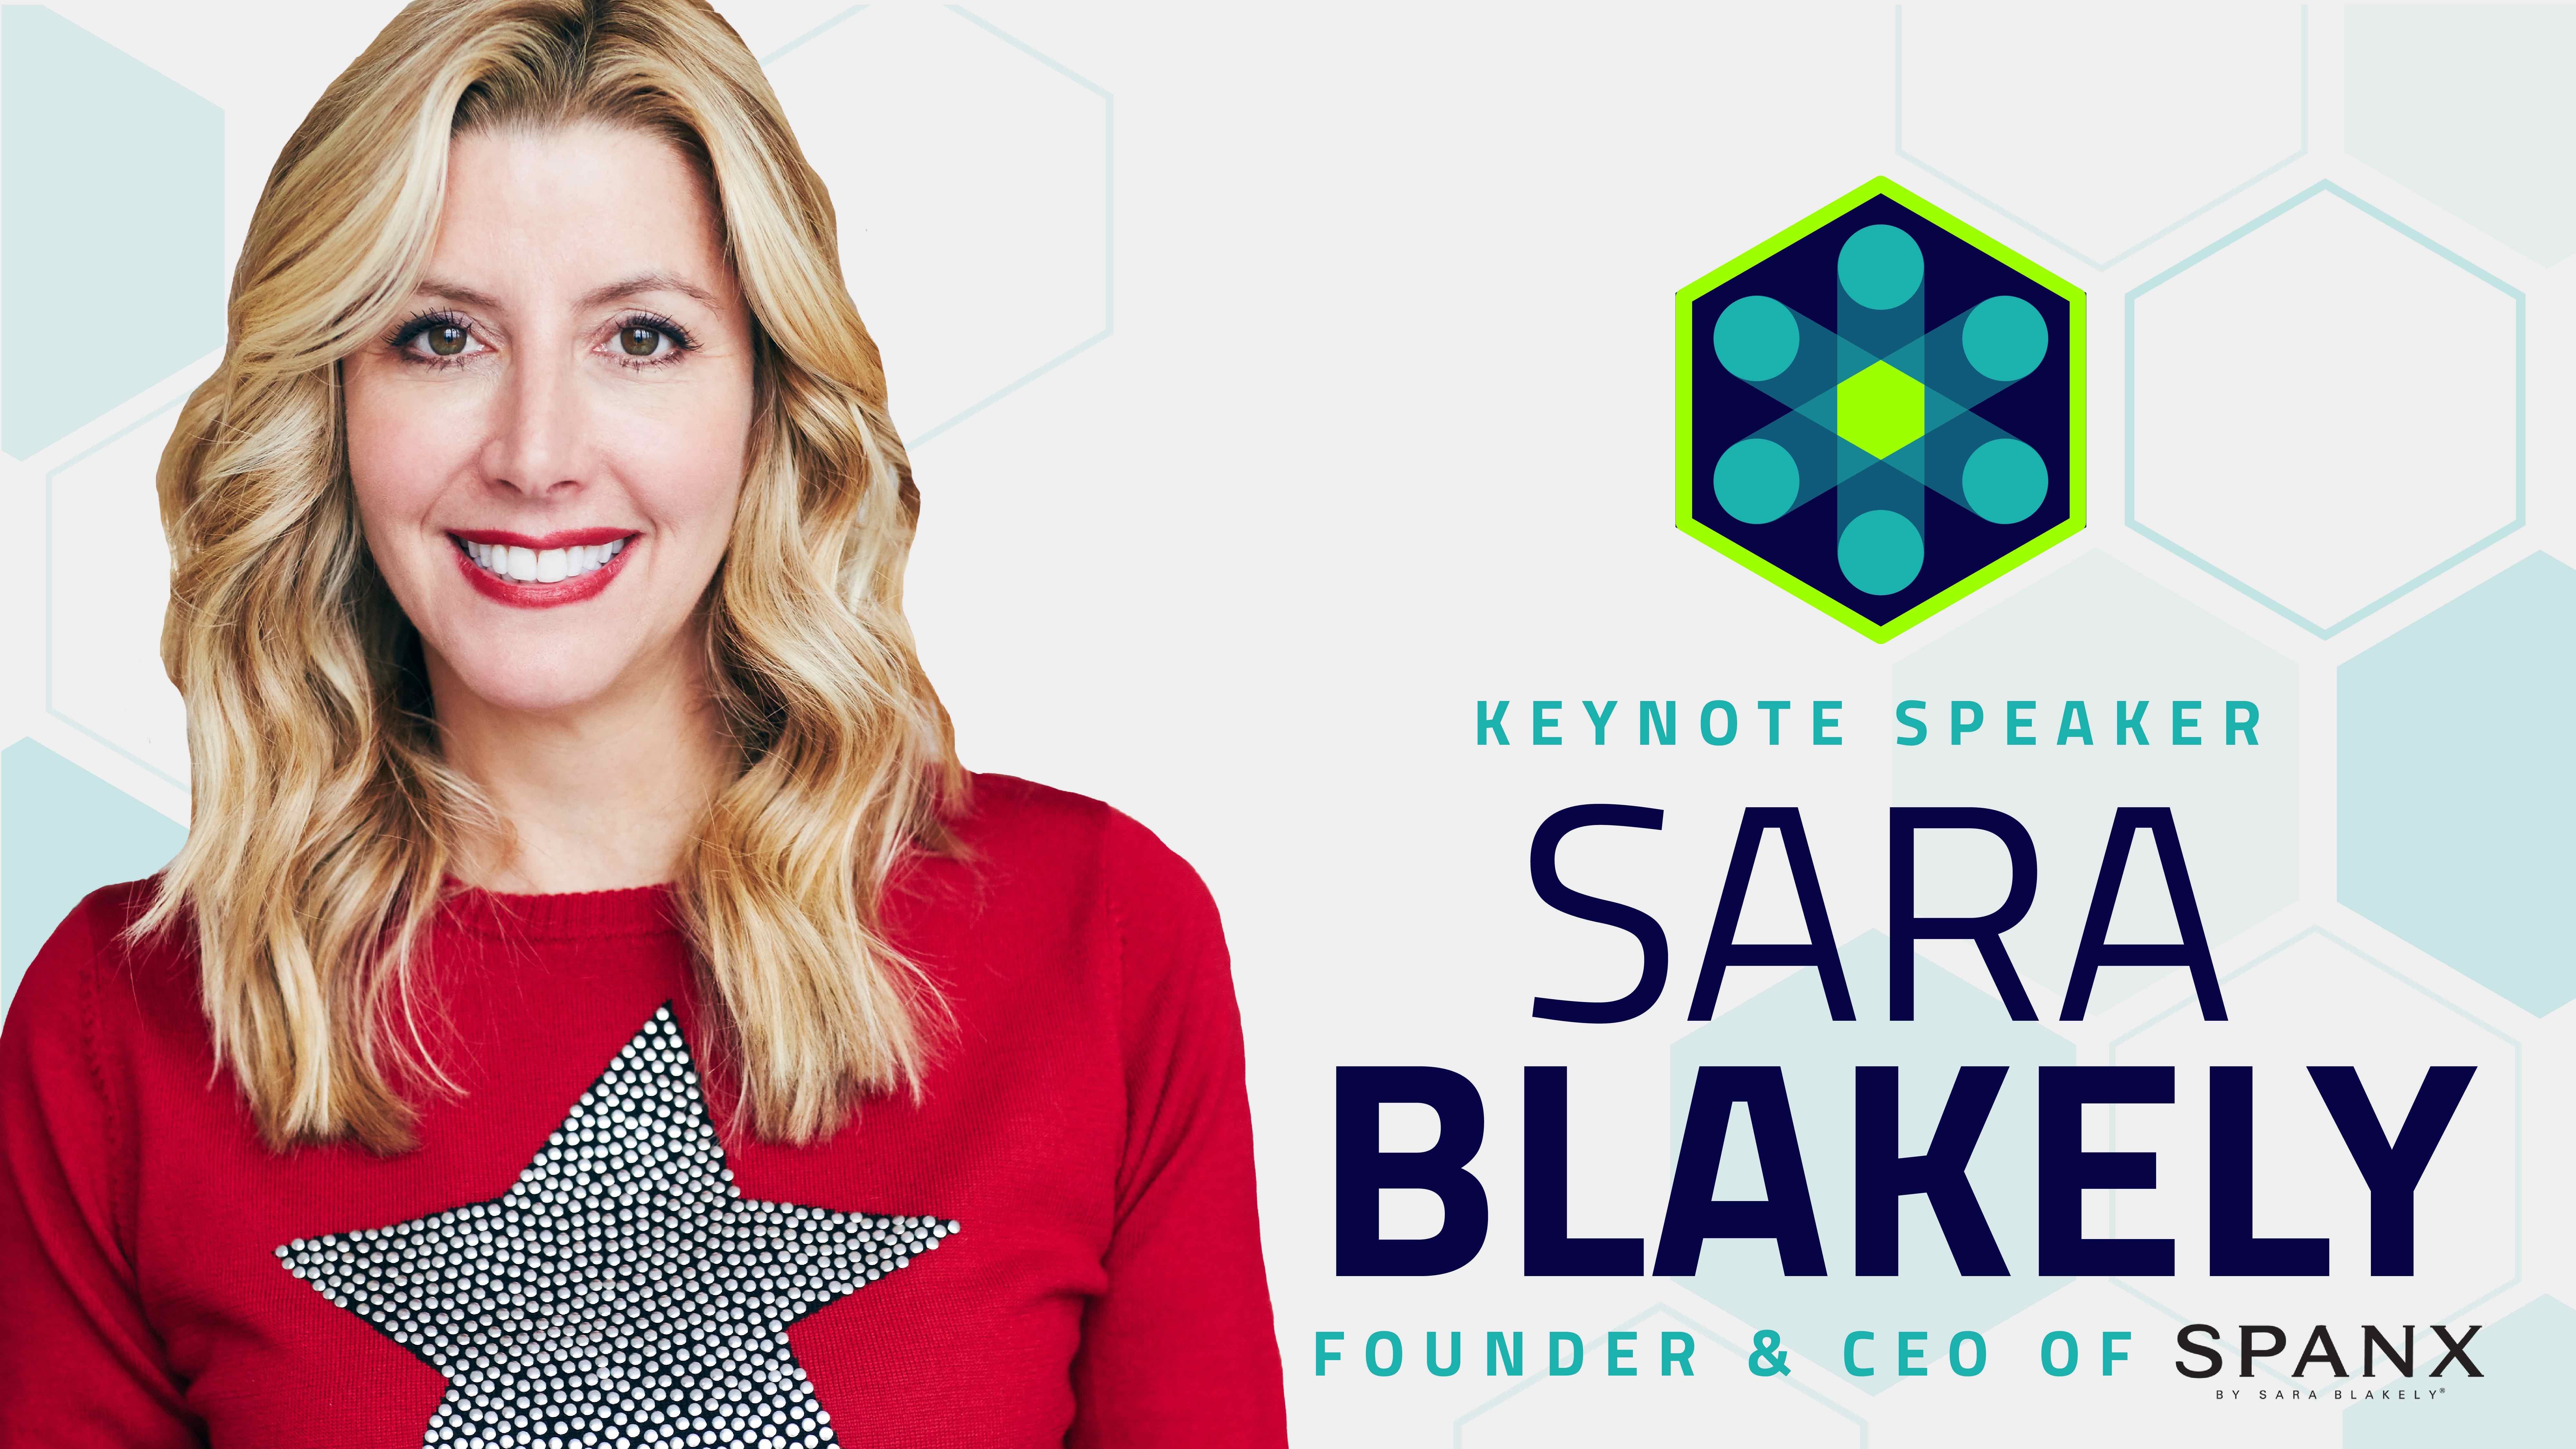 Spanx founder Sara Blakely is first female billionaire to donate